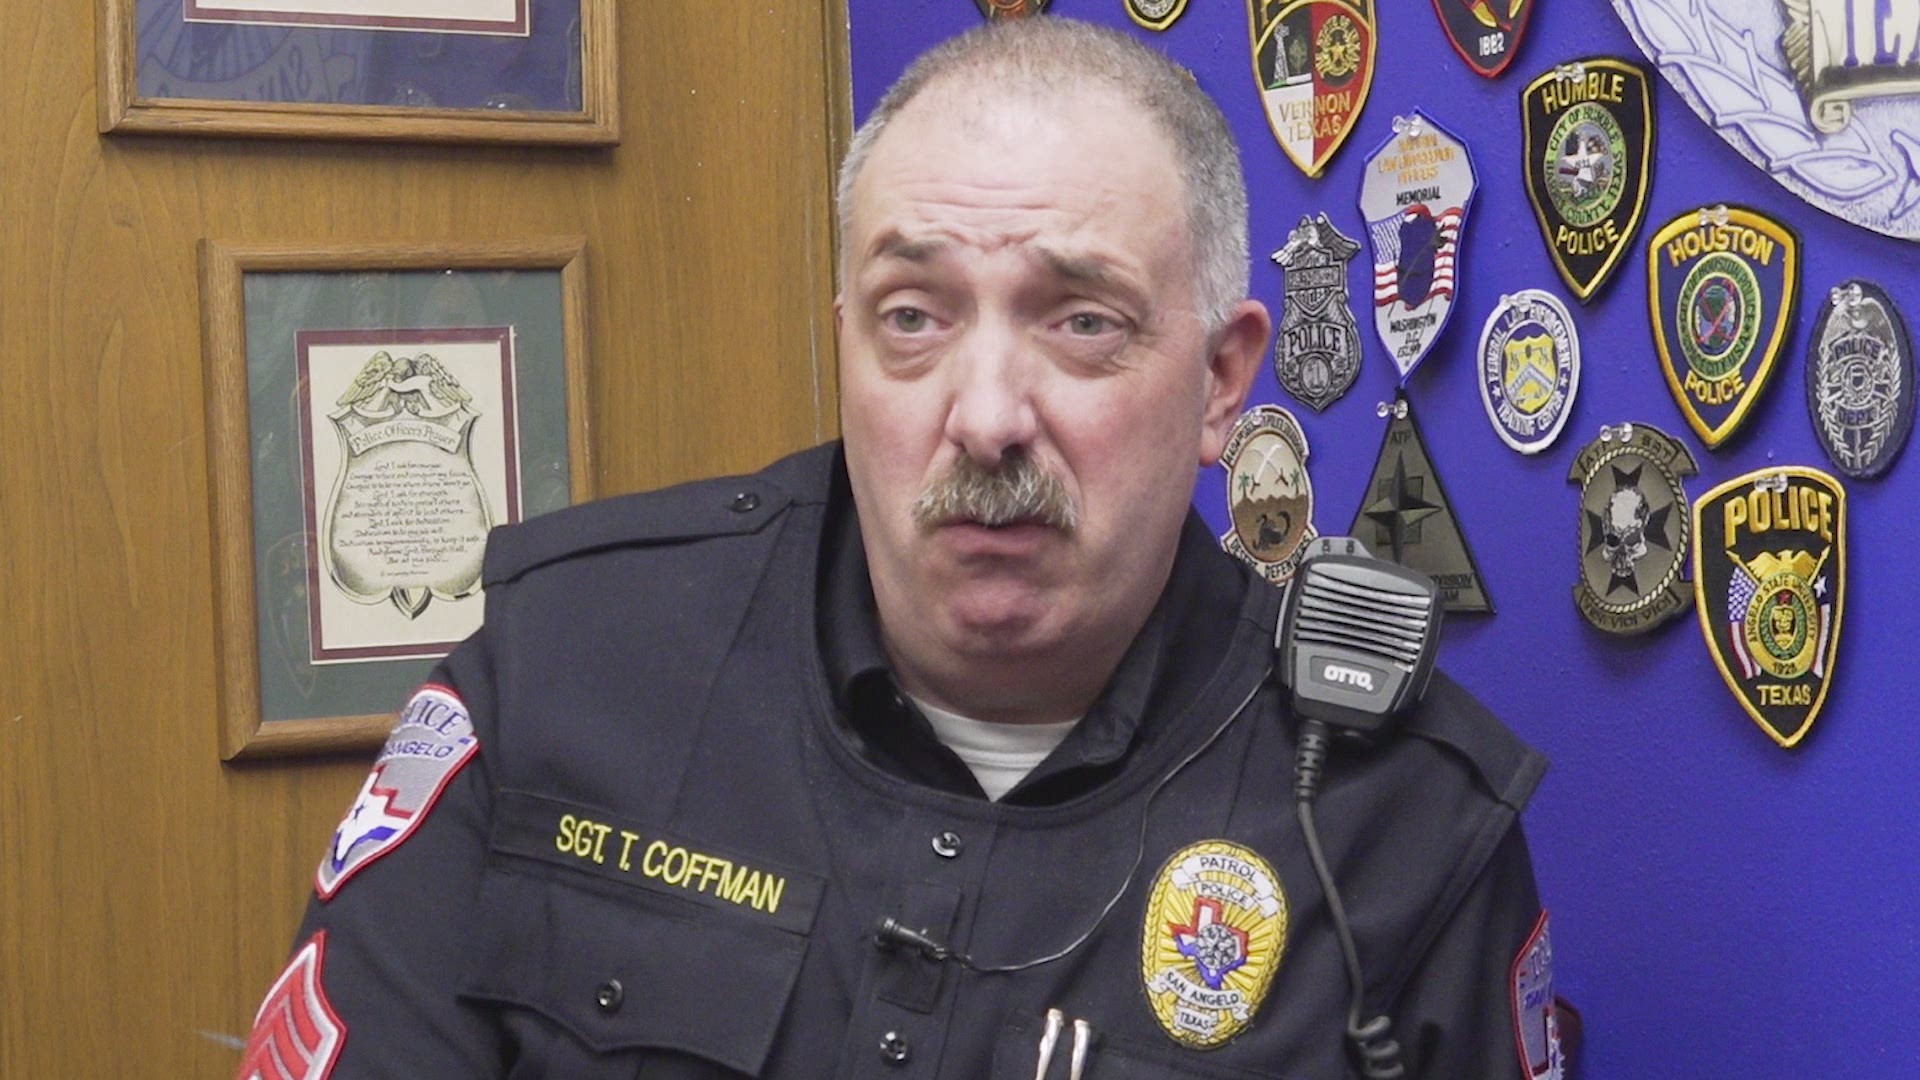 Sgt. Tim Coffman describes the kind of officers they want serving San Angelo